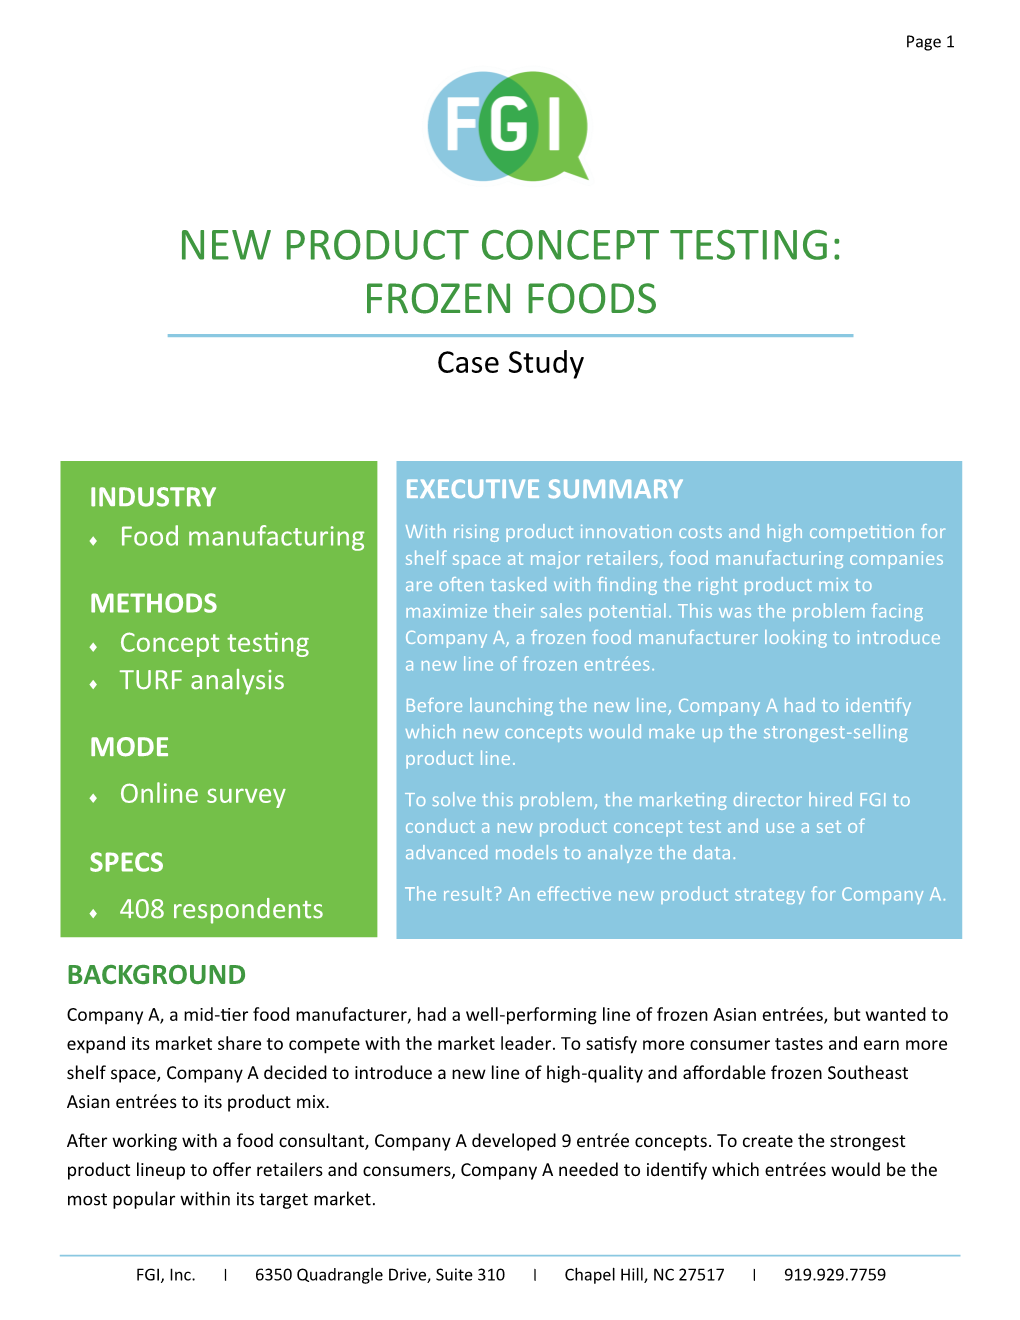 NEW PRODUCT CONCEPT TESTING: FROZEN FOODS Case Study